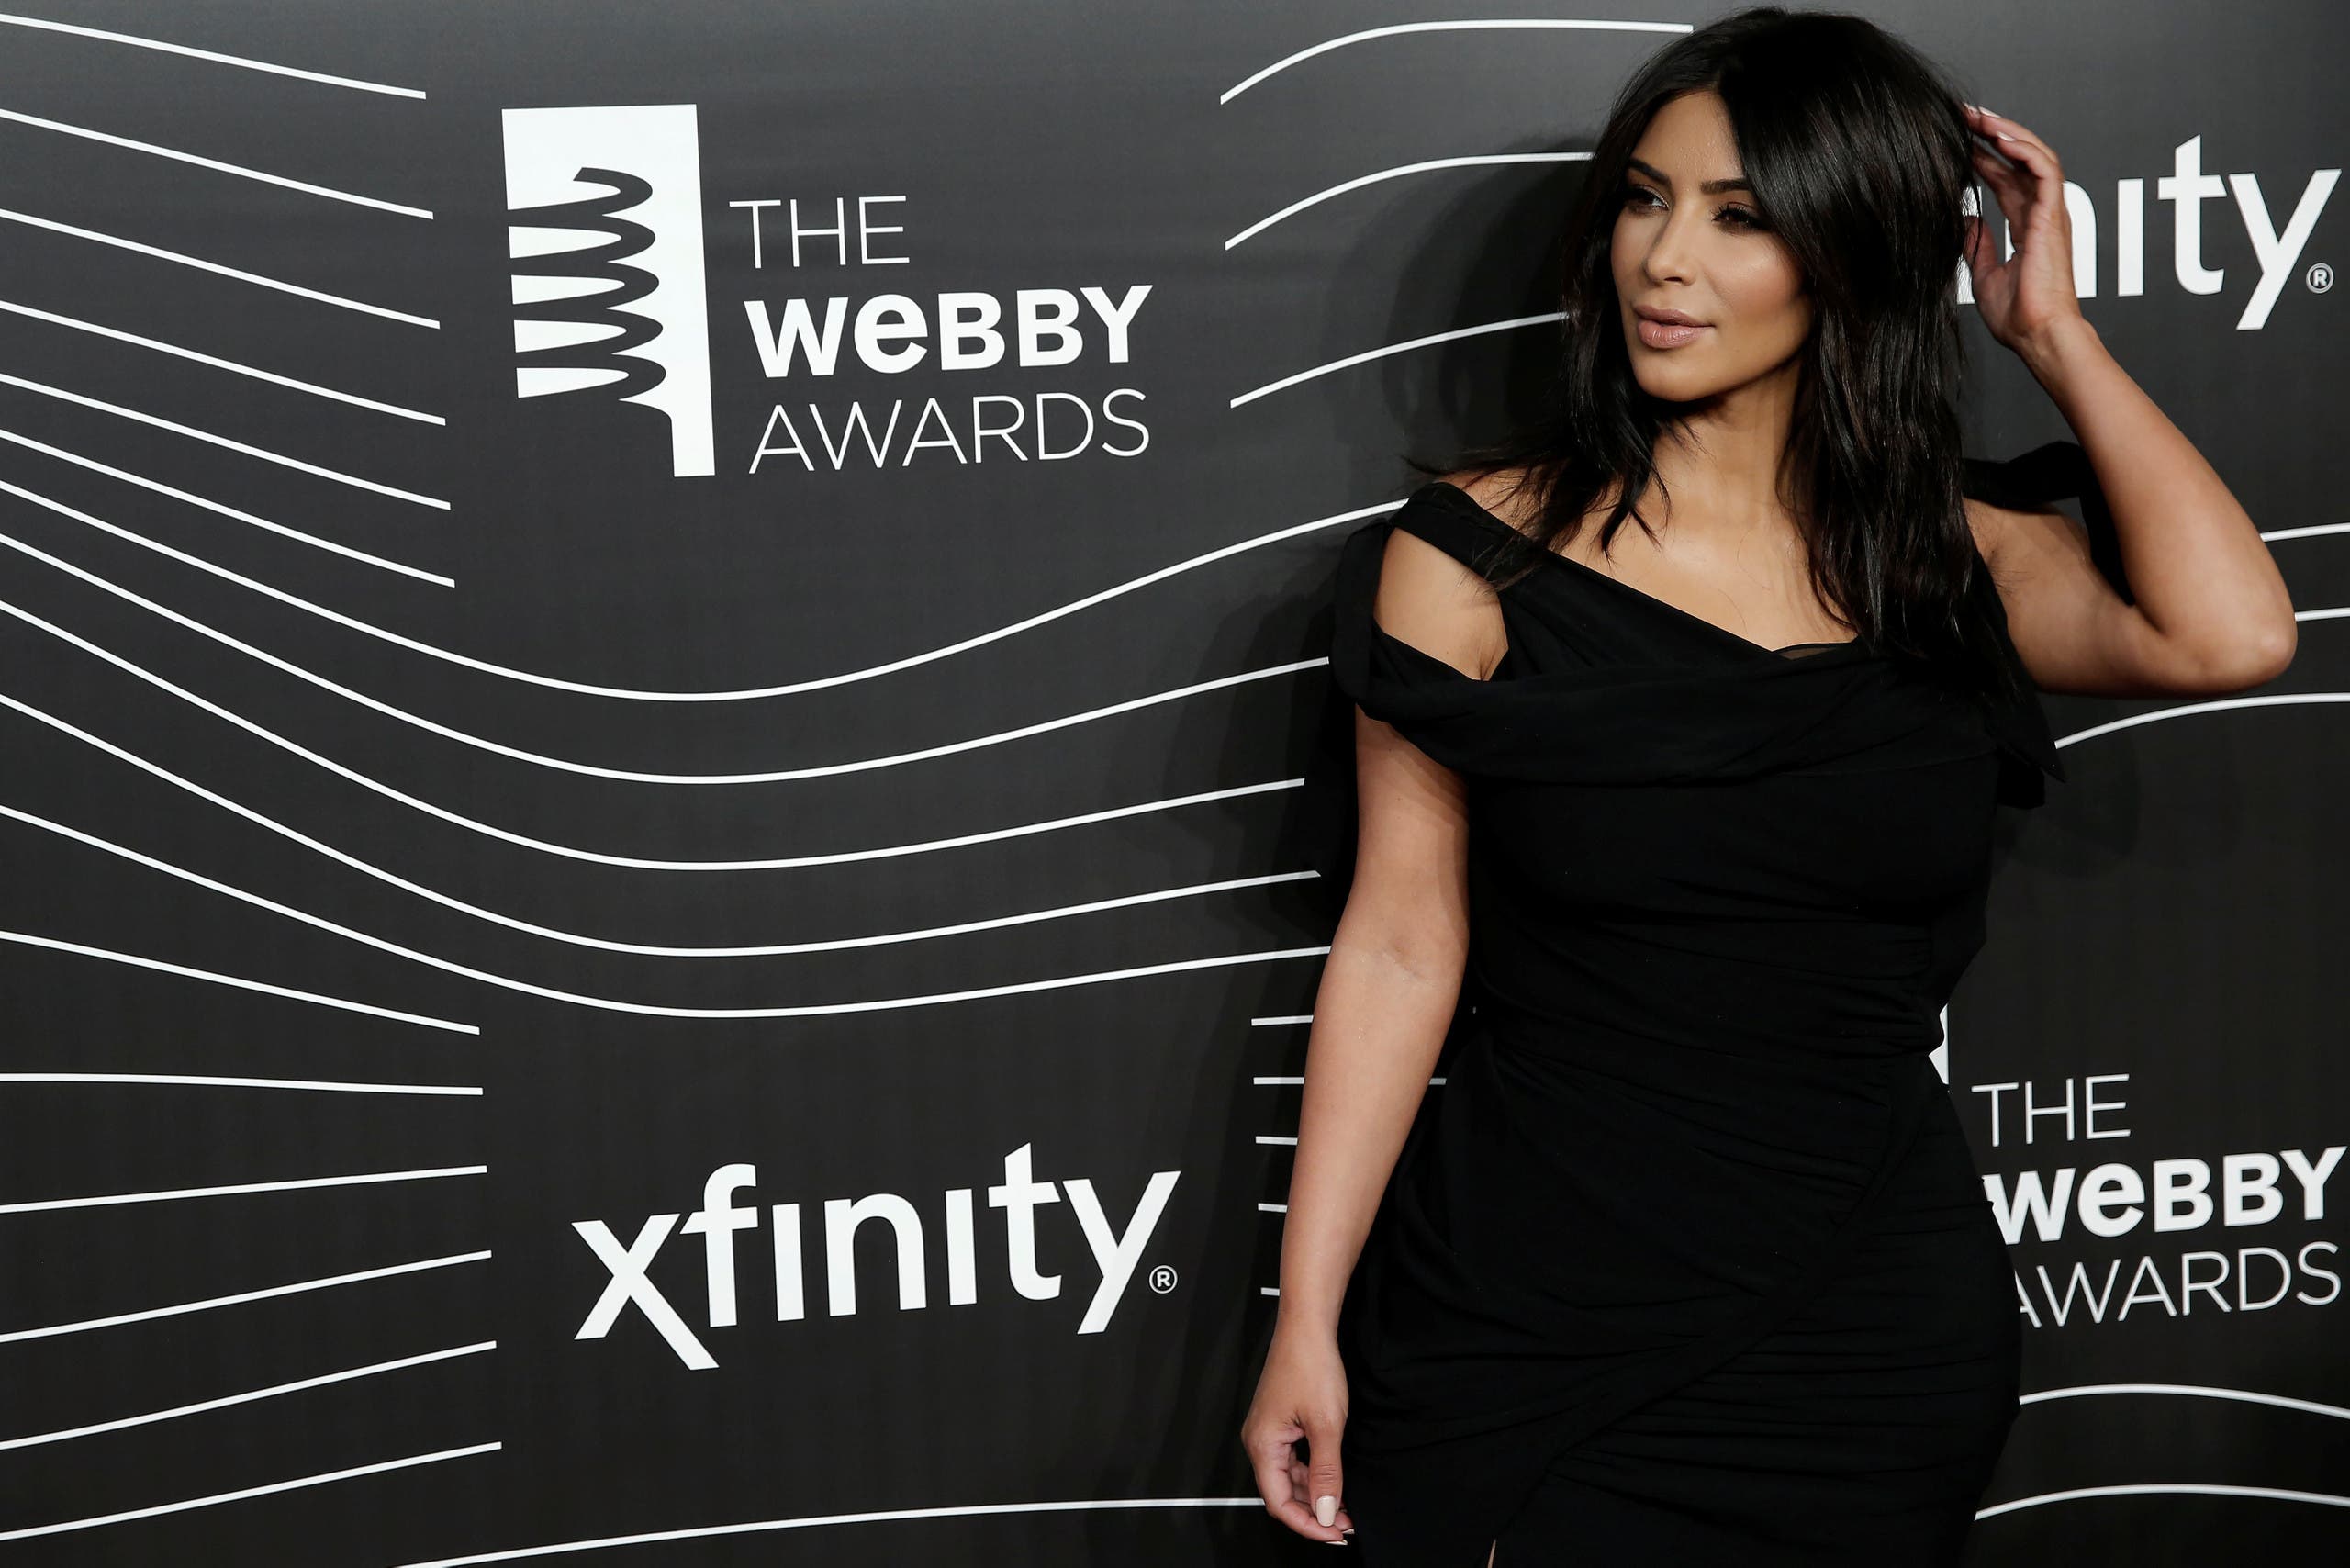 Kim Kardashian West poses as she arrives for the 20th Annual Webby Awards in Manhattan. (Reuters)